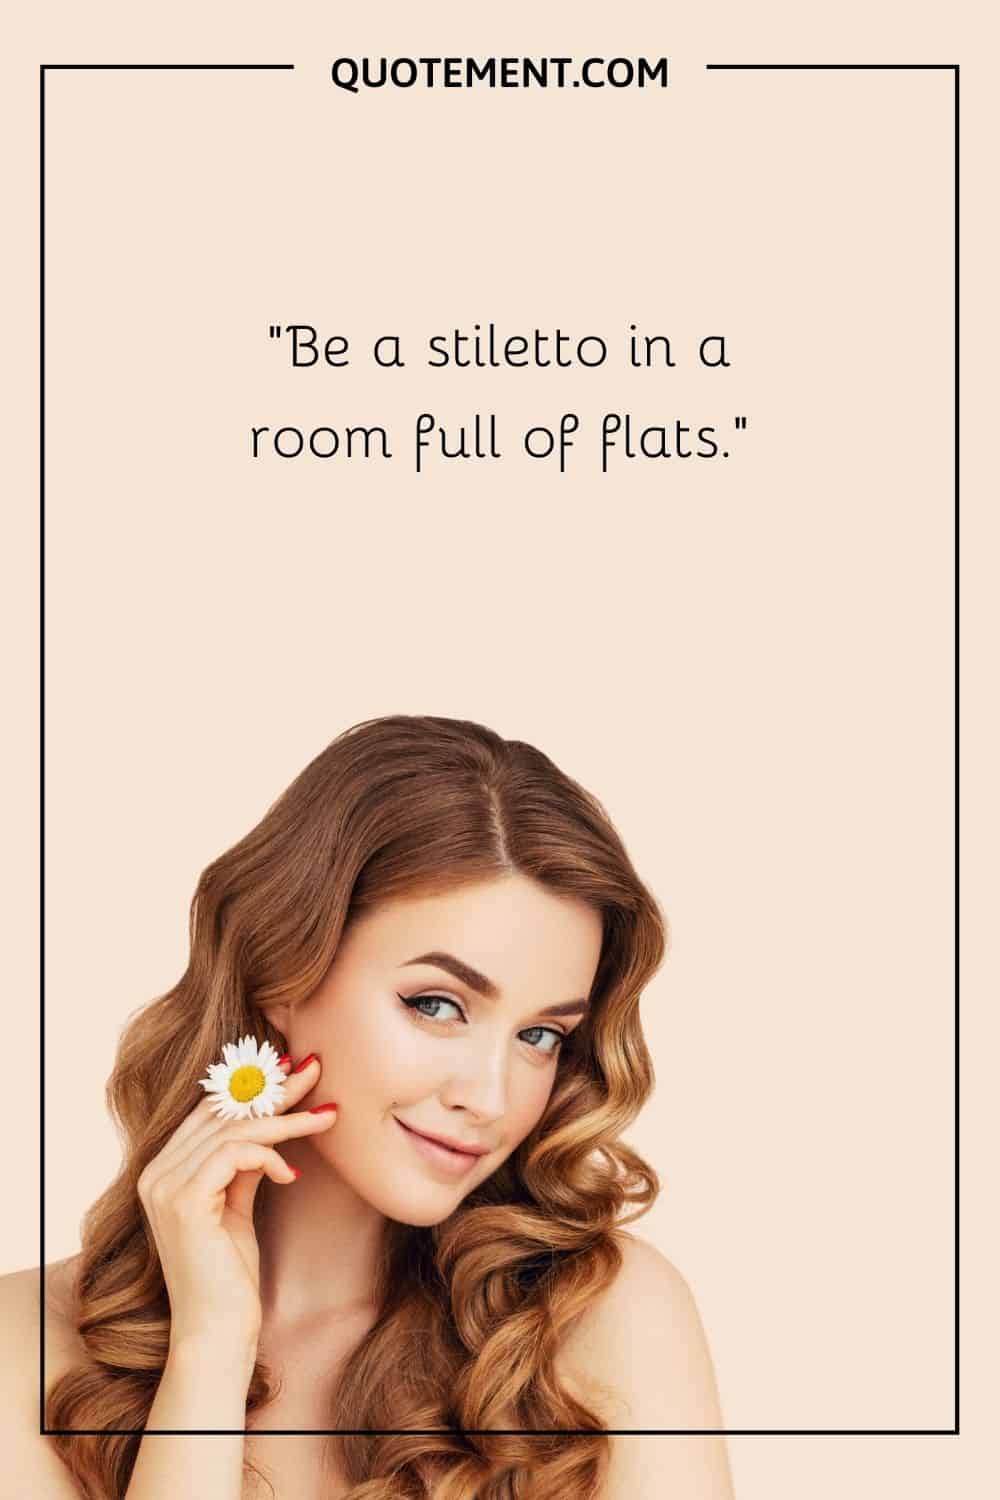 Be a stiletto in a room full of flats.